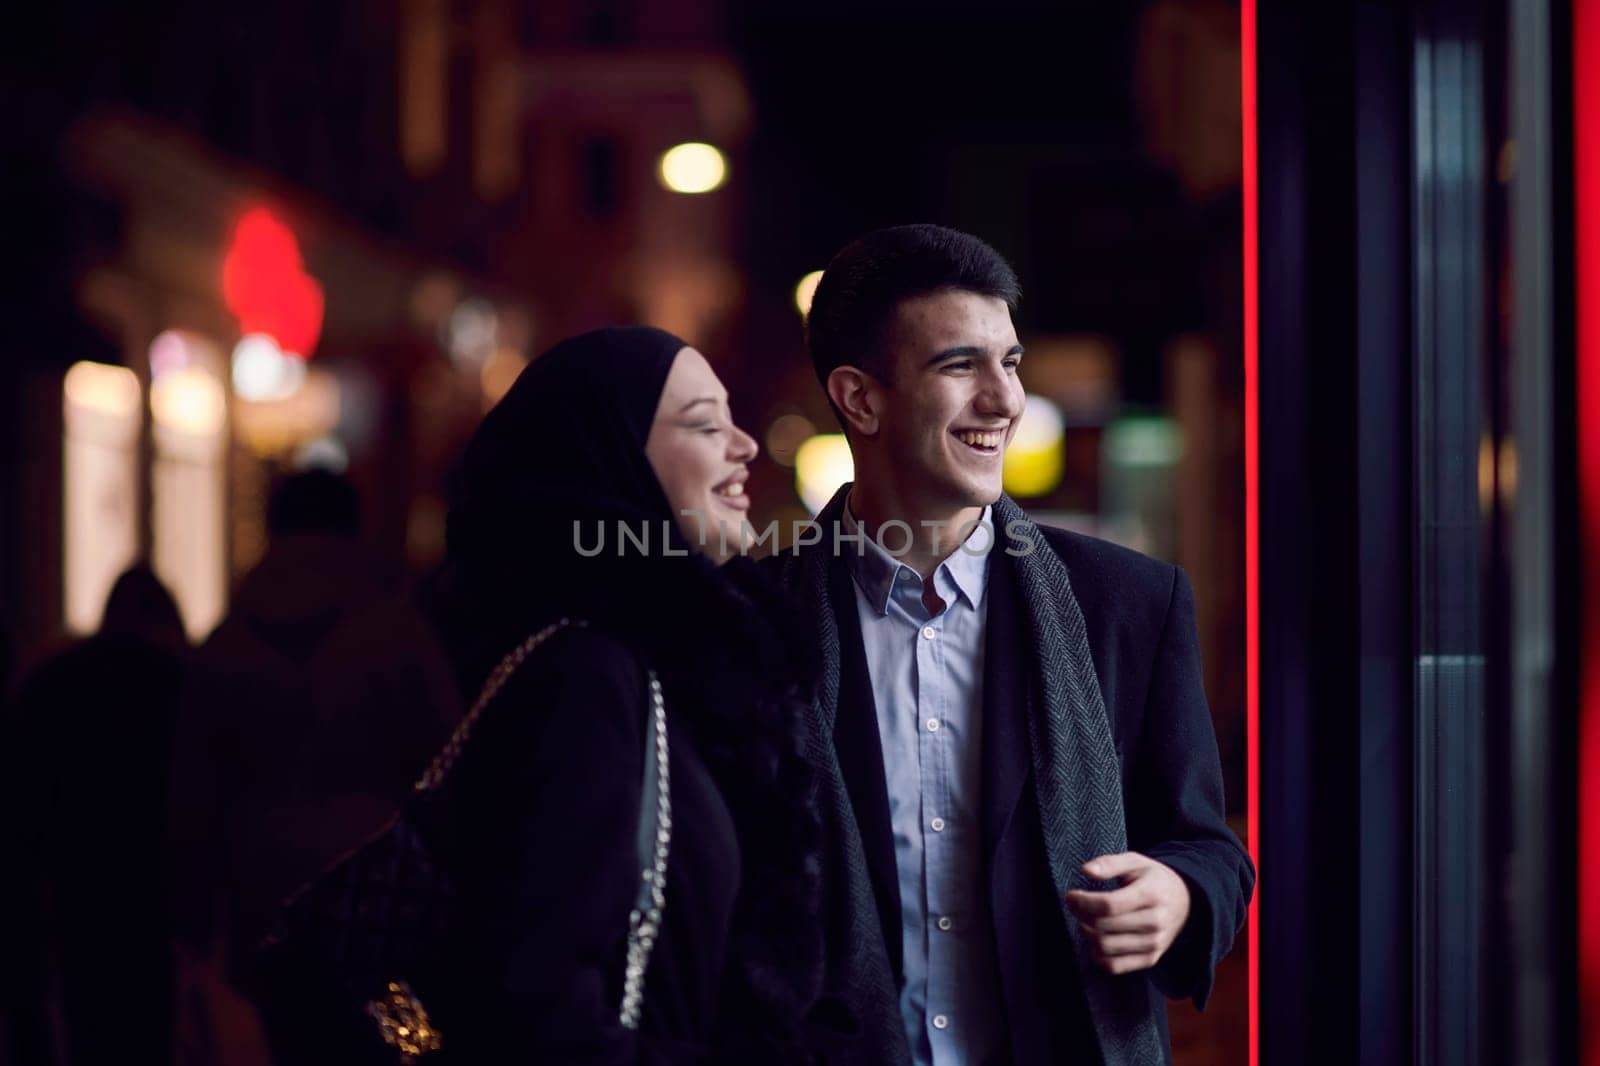 Happy multicultural business couple walking together outdoors in an urban city street at night near a jewelry shopping store window. by dotshock